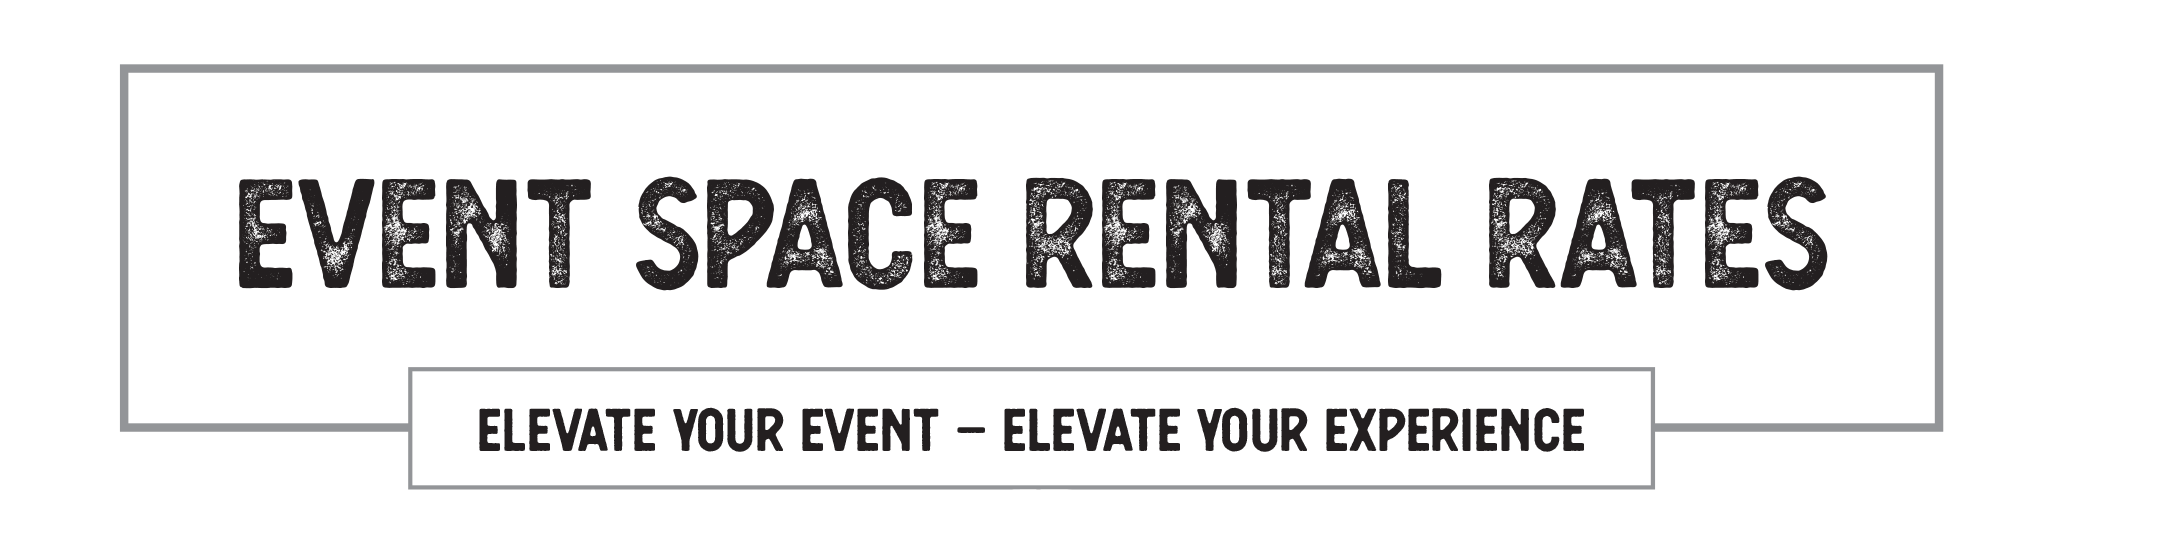 Event Space Rental Rates